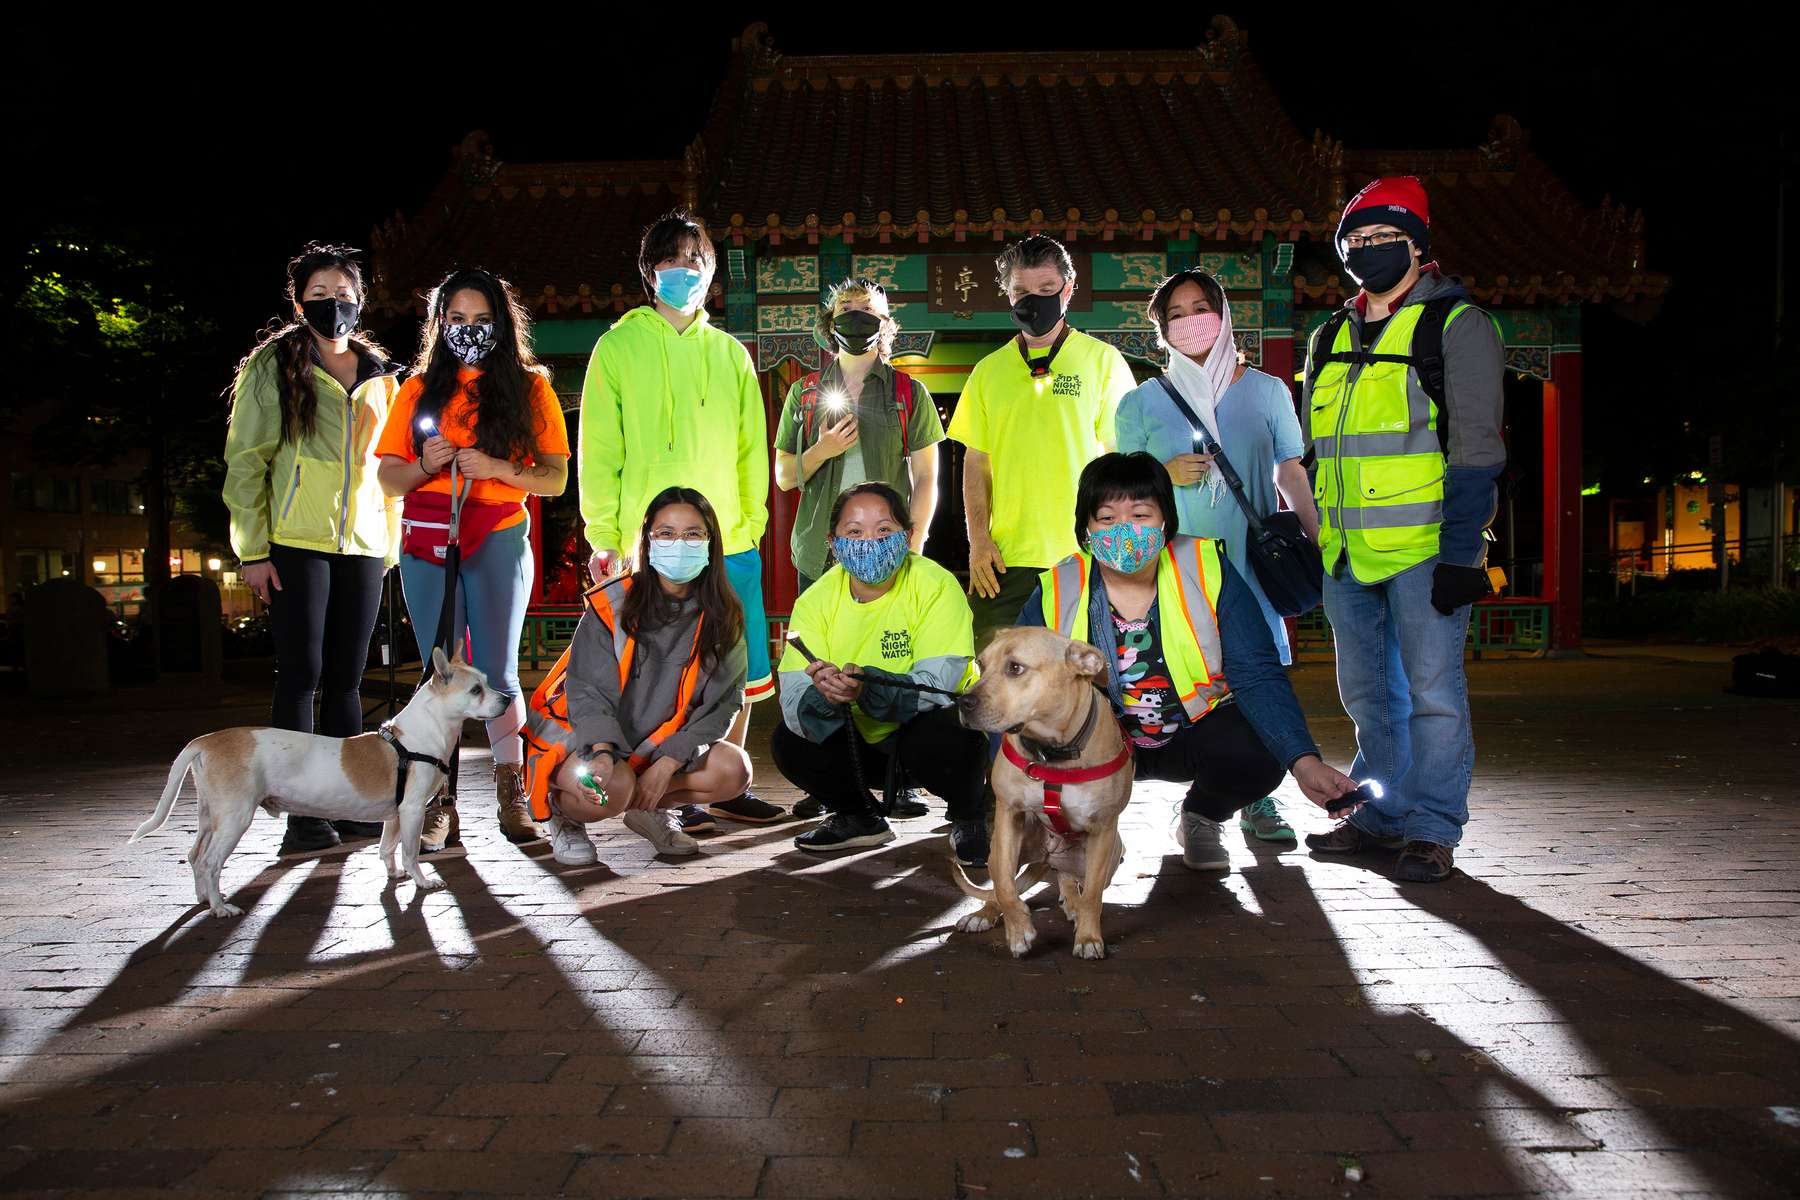 Volunteers of the Night Watch group pose for a photo before the start of their shift patrolling in the Chinatown - International District in Seattle, Washington on July 20, 2020. After a wave of looting, vandalism and racist incidents in the neighborhood in early June the group took matters into their own hands. They patrol the neighborhood from 10pm until 2pm every night.